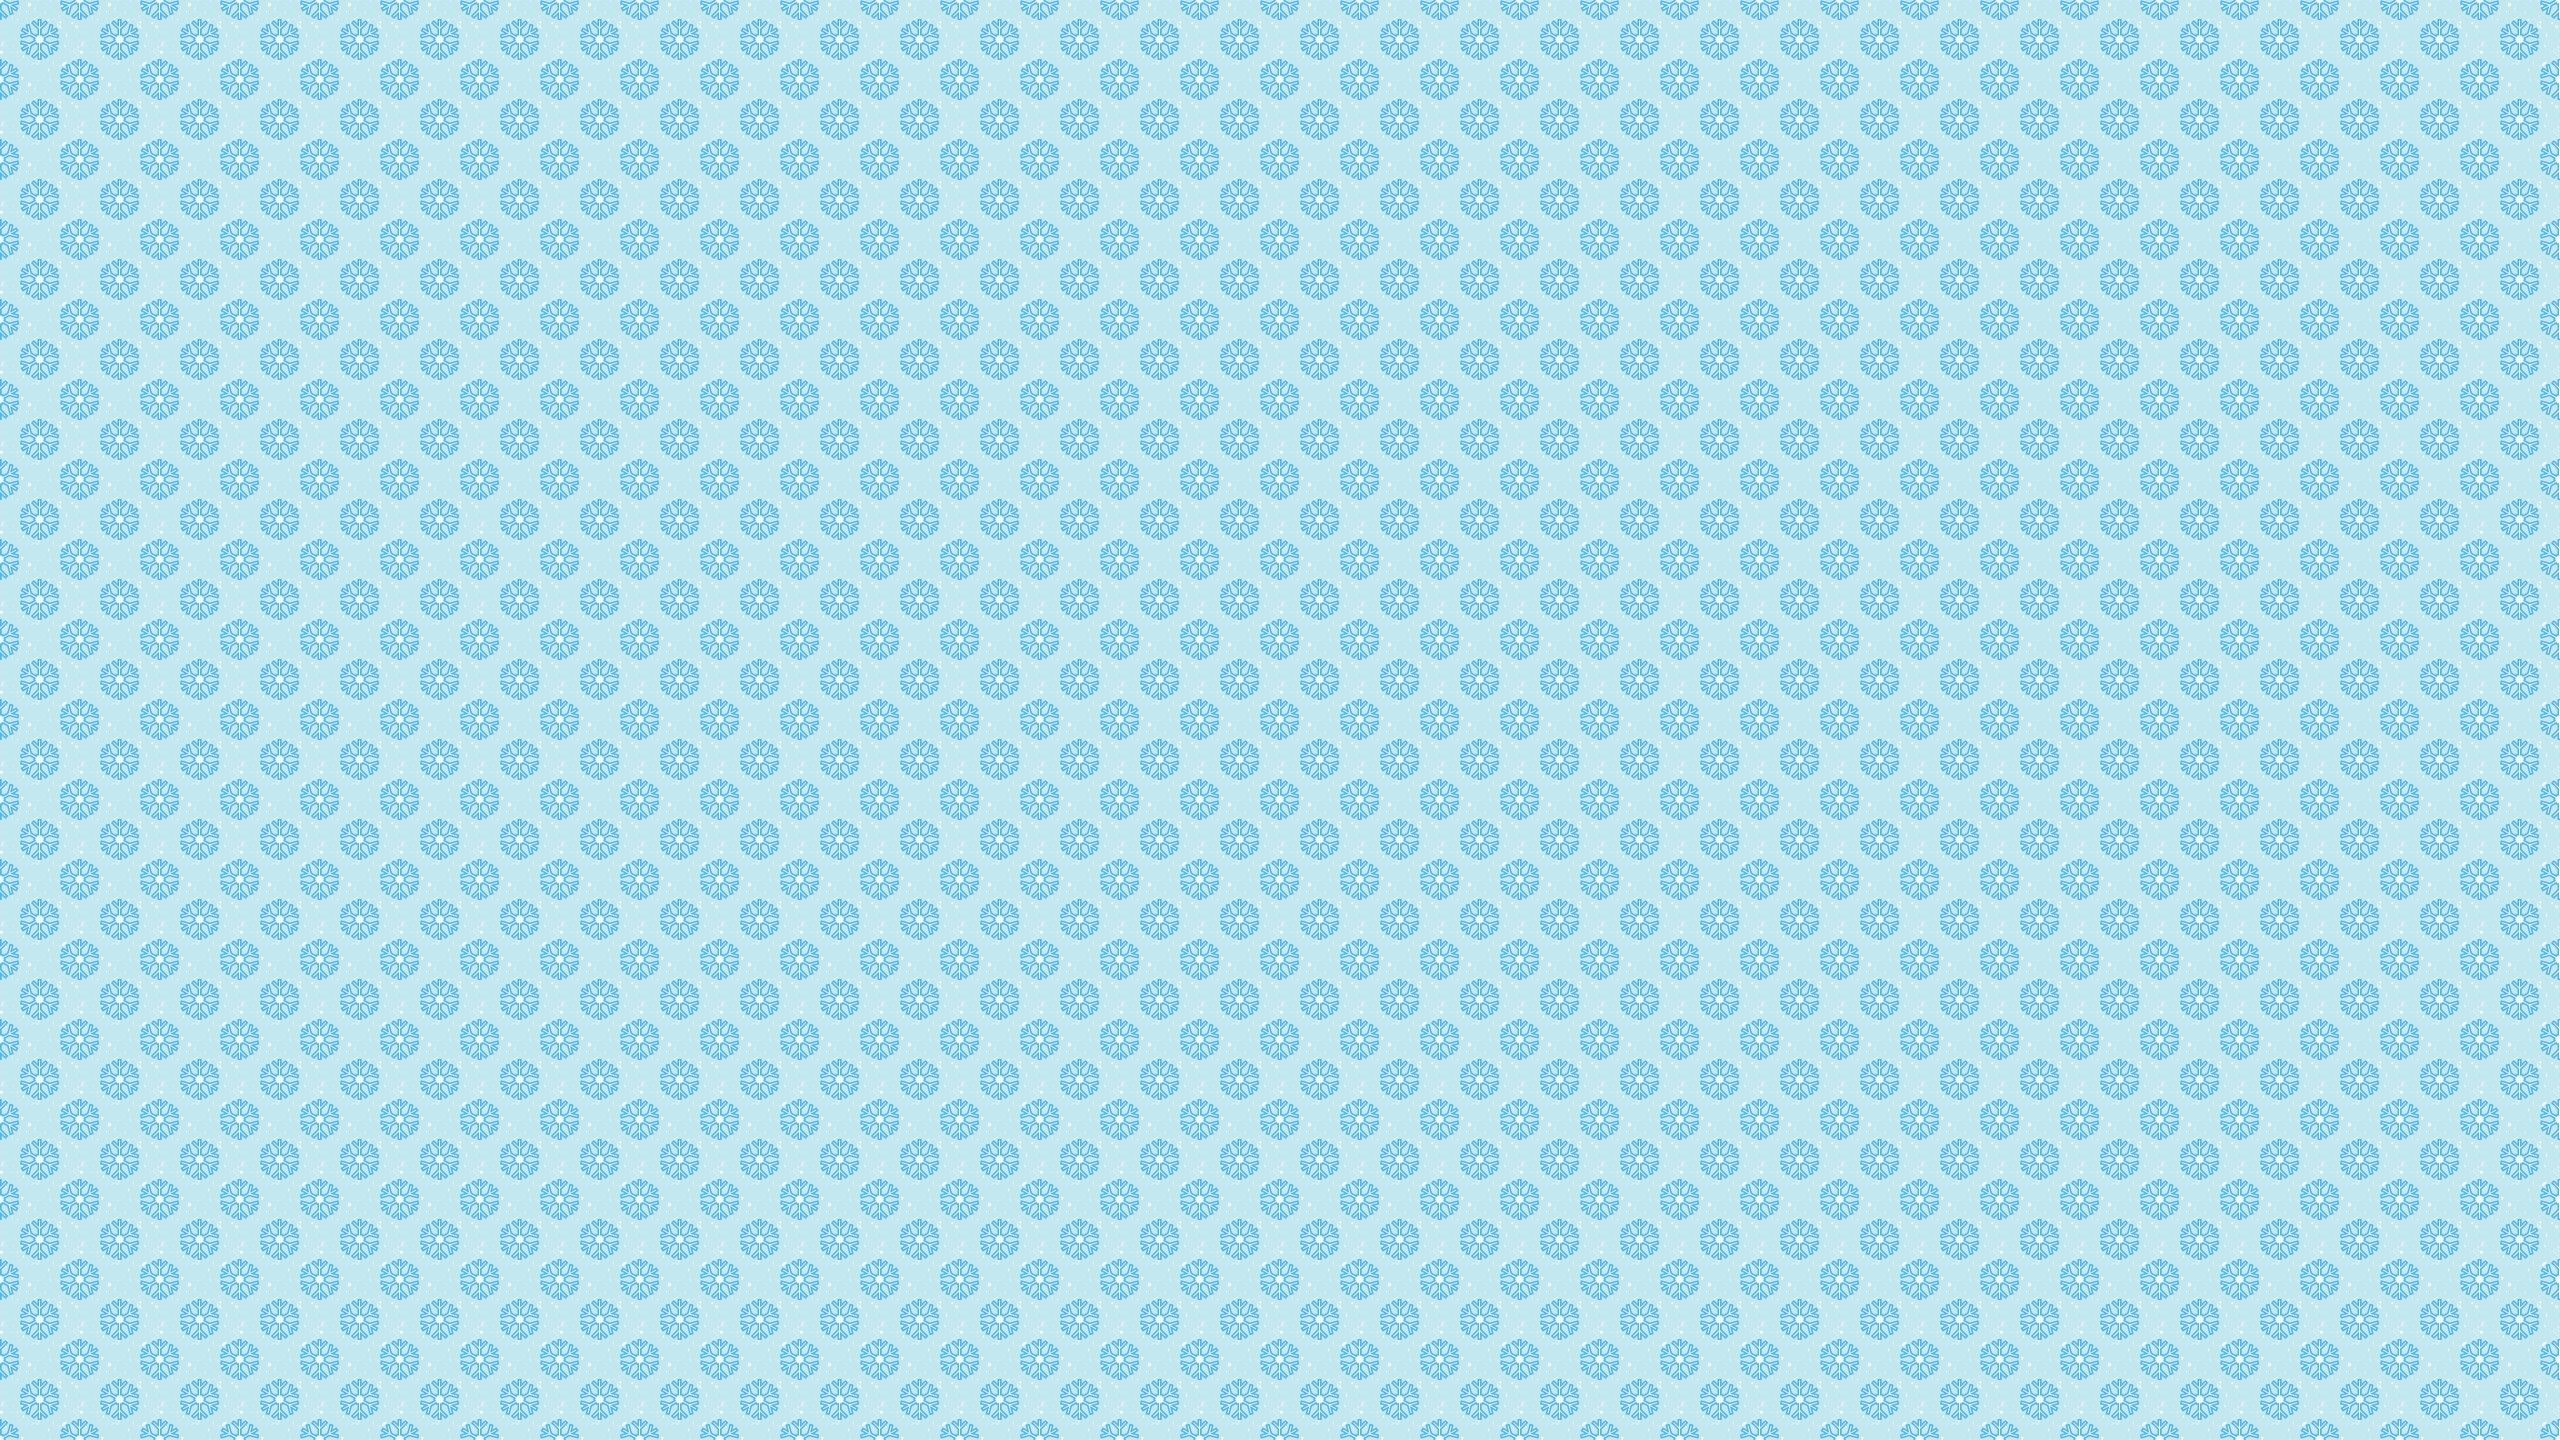 Aesthetic Cute Simple Patterns Wallpapers